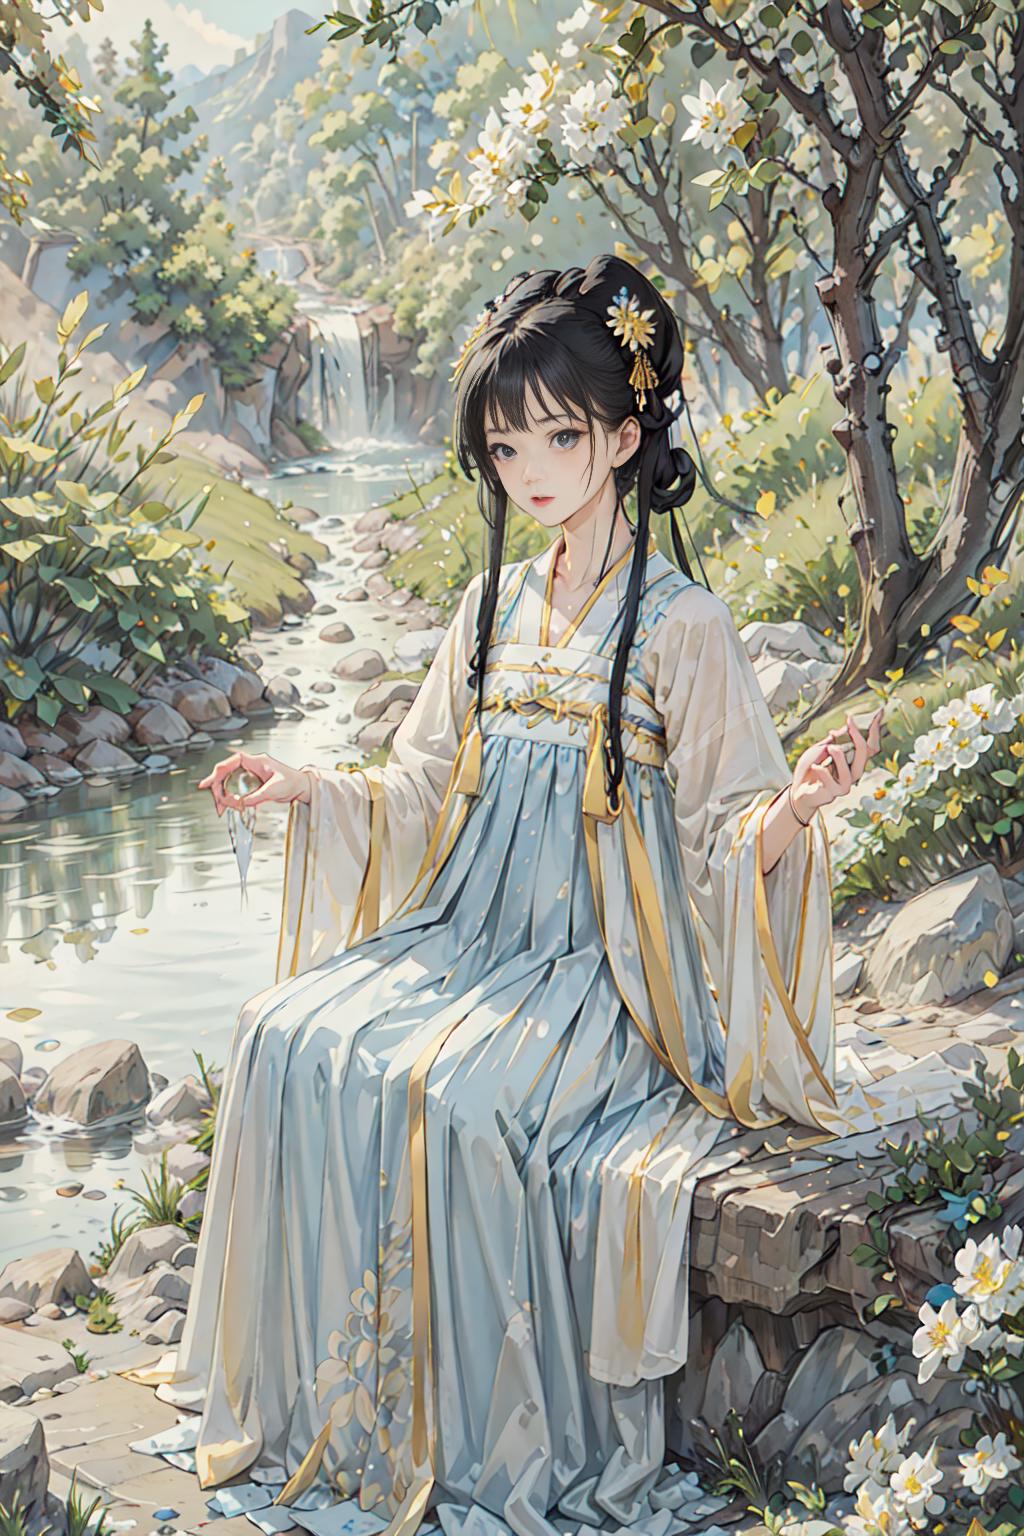 A beautifully drawn illustration of a woman sitting by a stream in a flowing dress.